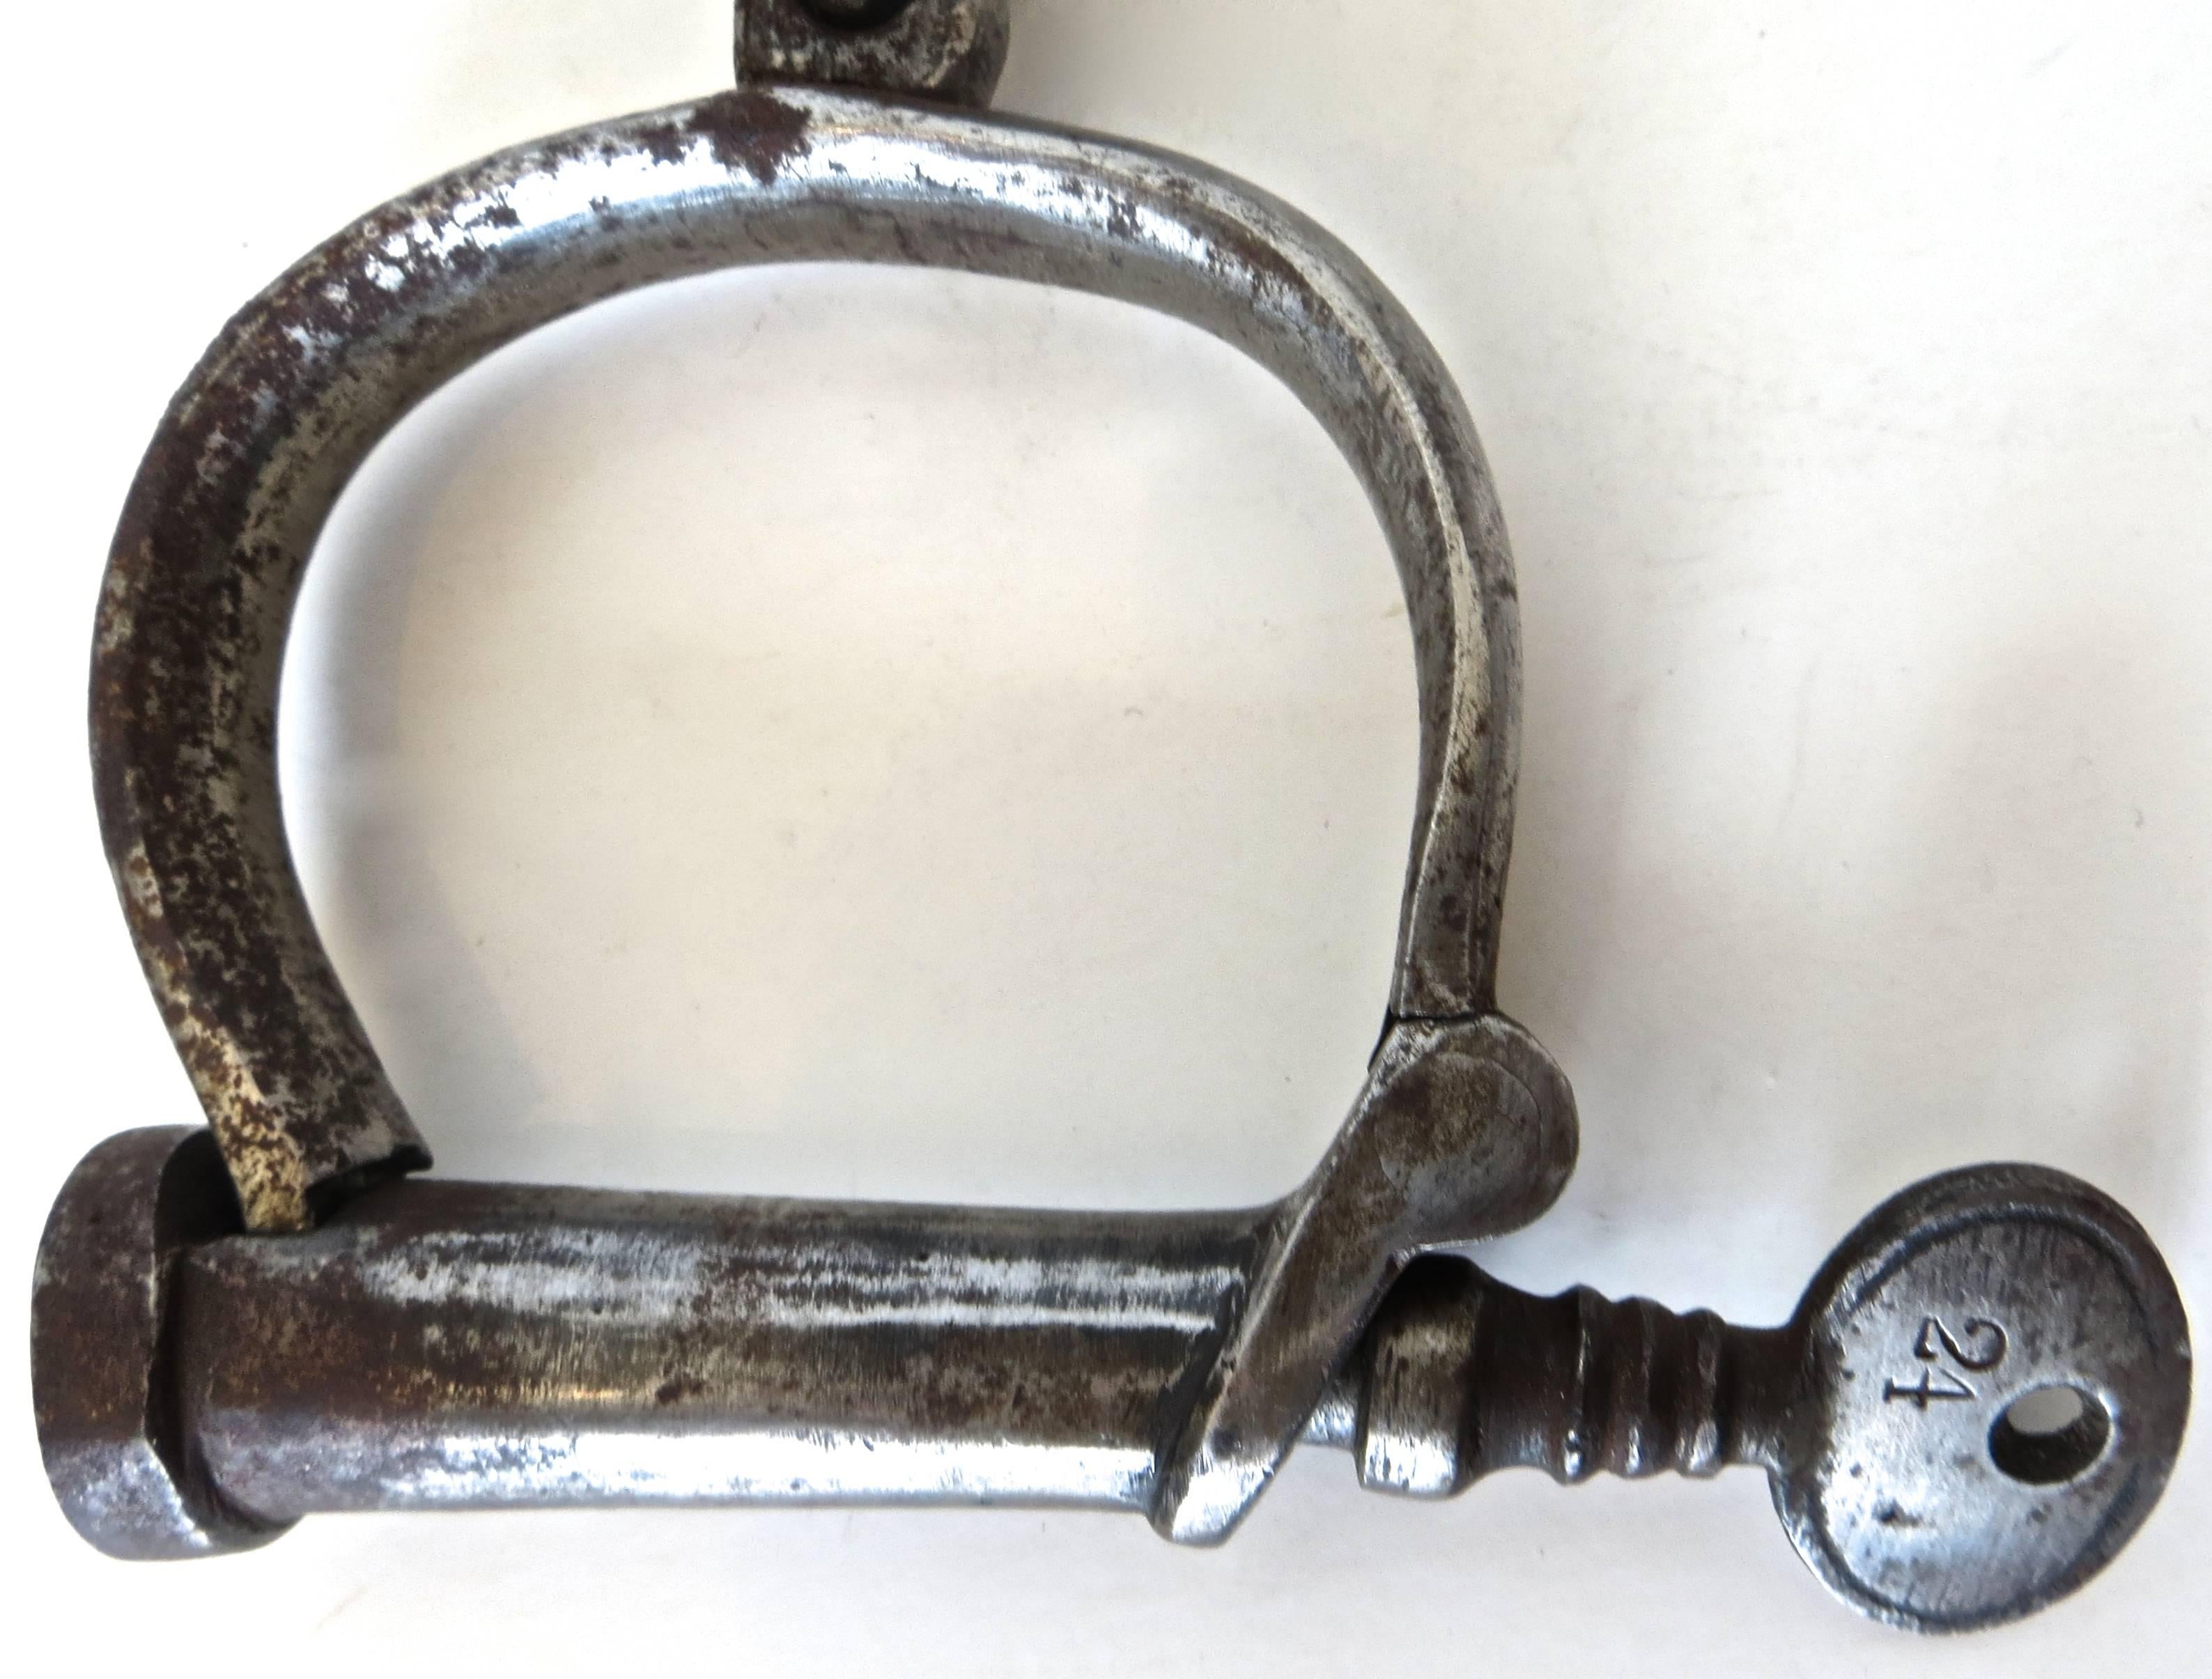 English Handcuffs by Hiatt, England 'Prop From Magician' Labeled#24, circa 1870